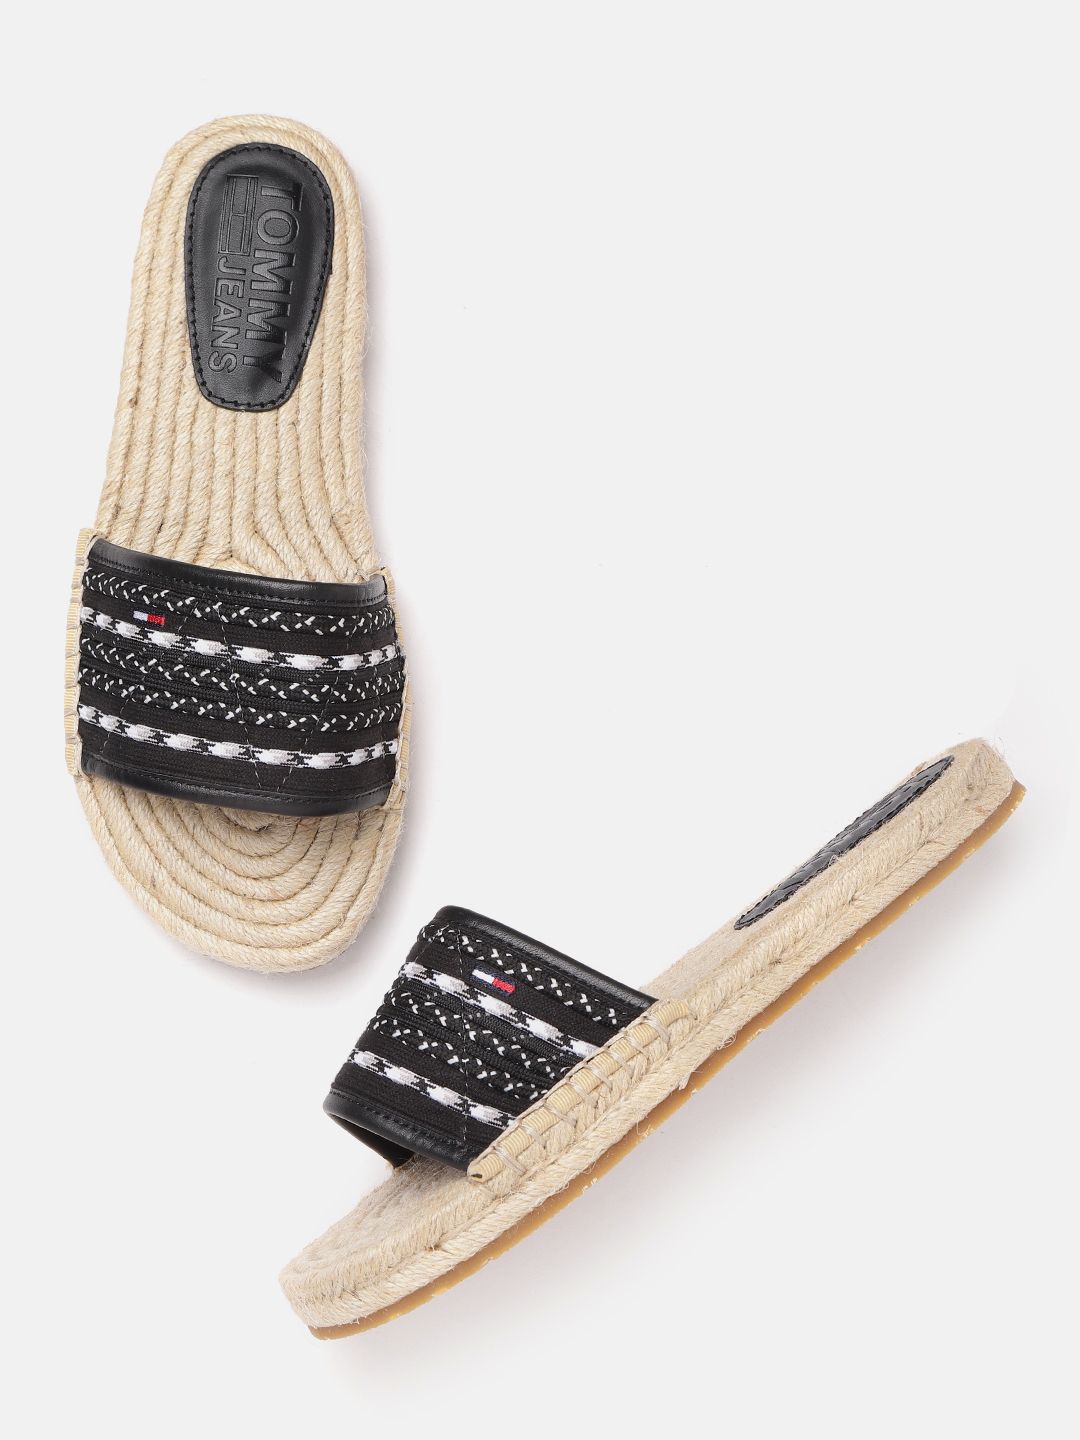 Tommy Hilfiger Women Black & White Woven Design Espadrille Style Open Toe Flats Price in India